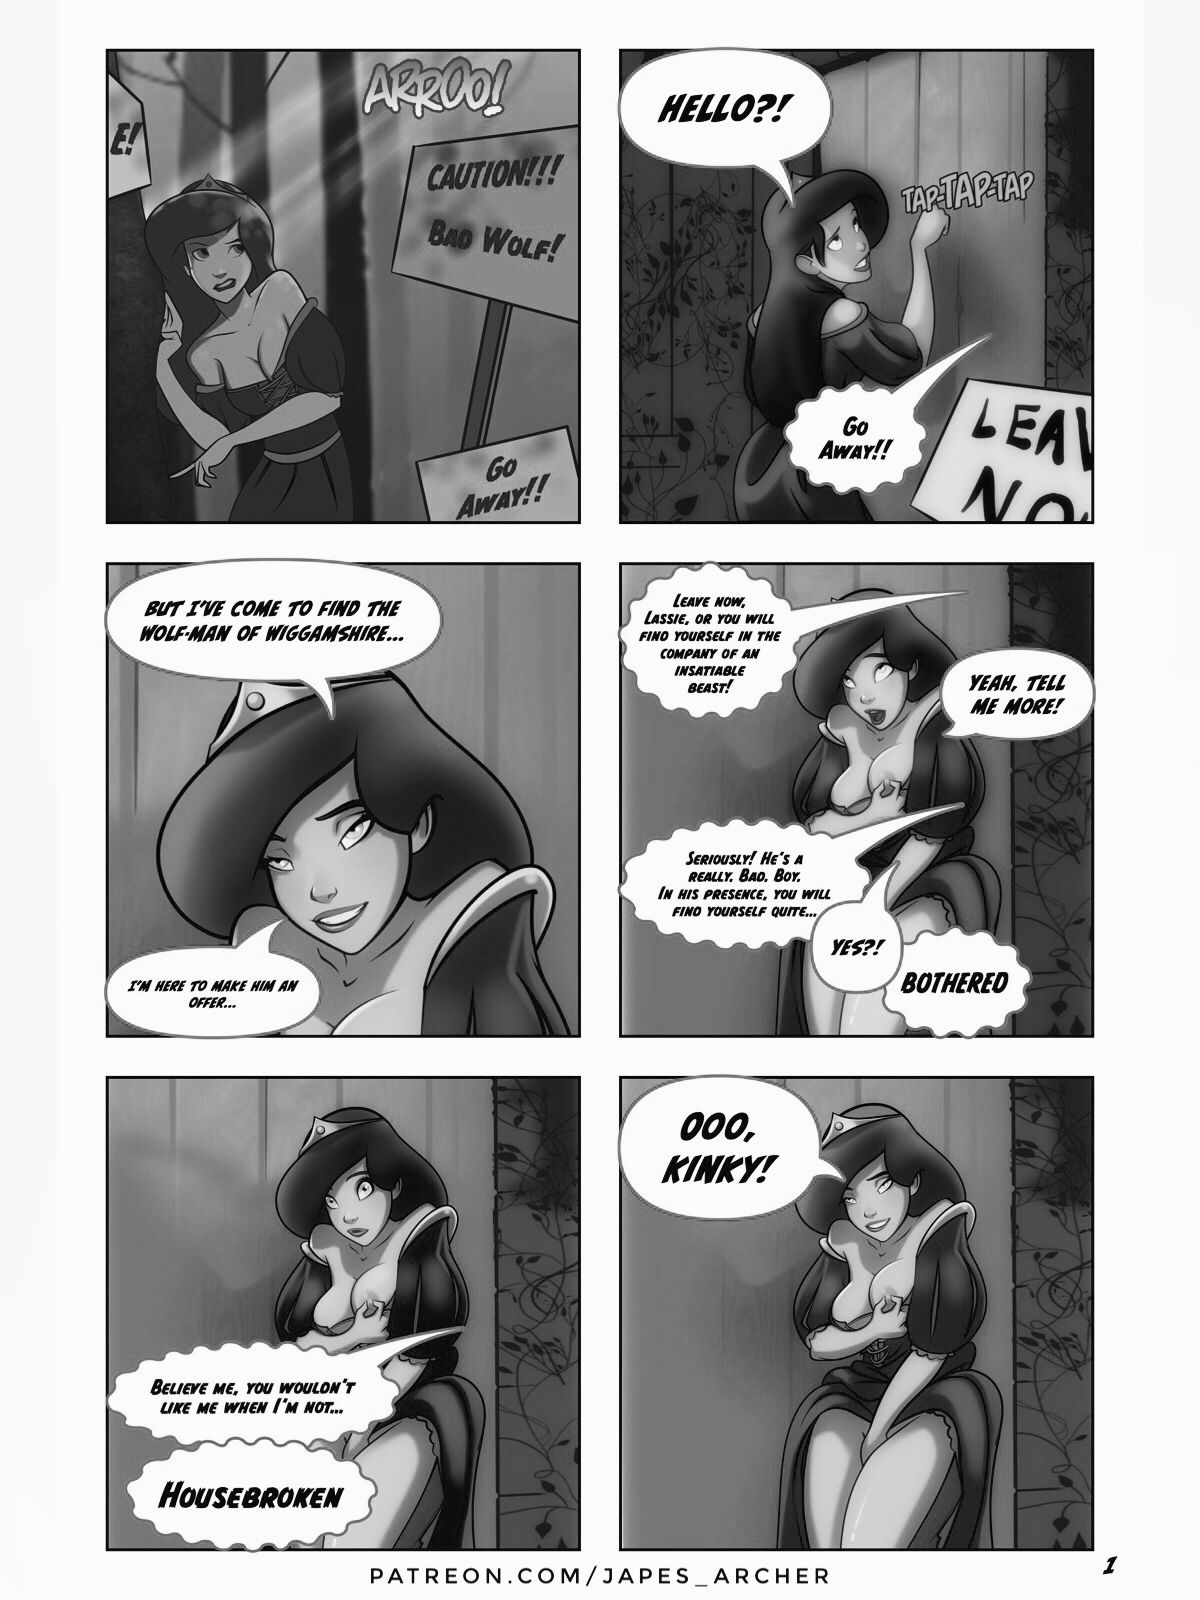 Jackanapes The Second - Japes page 2